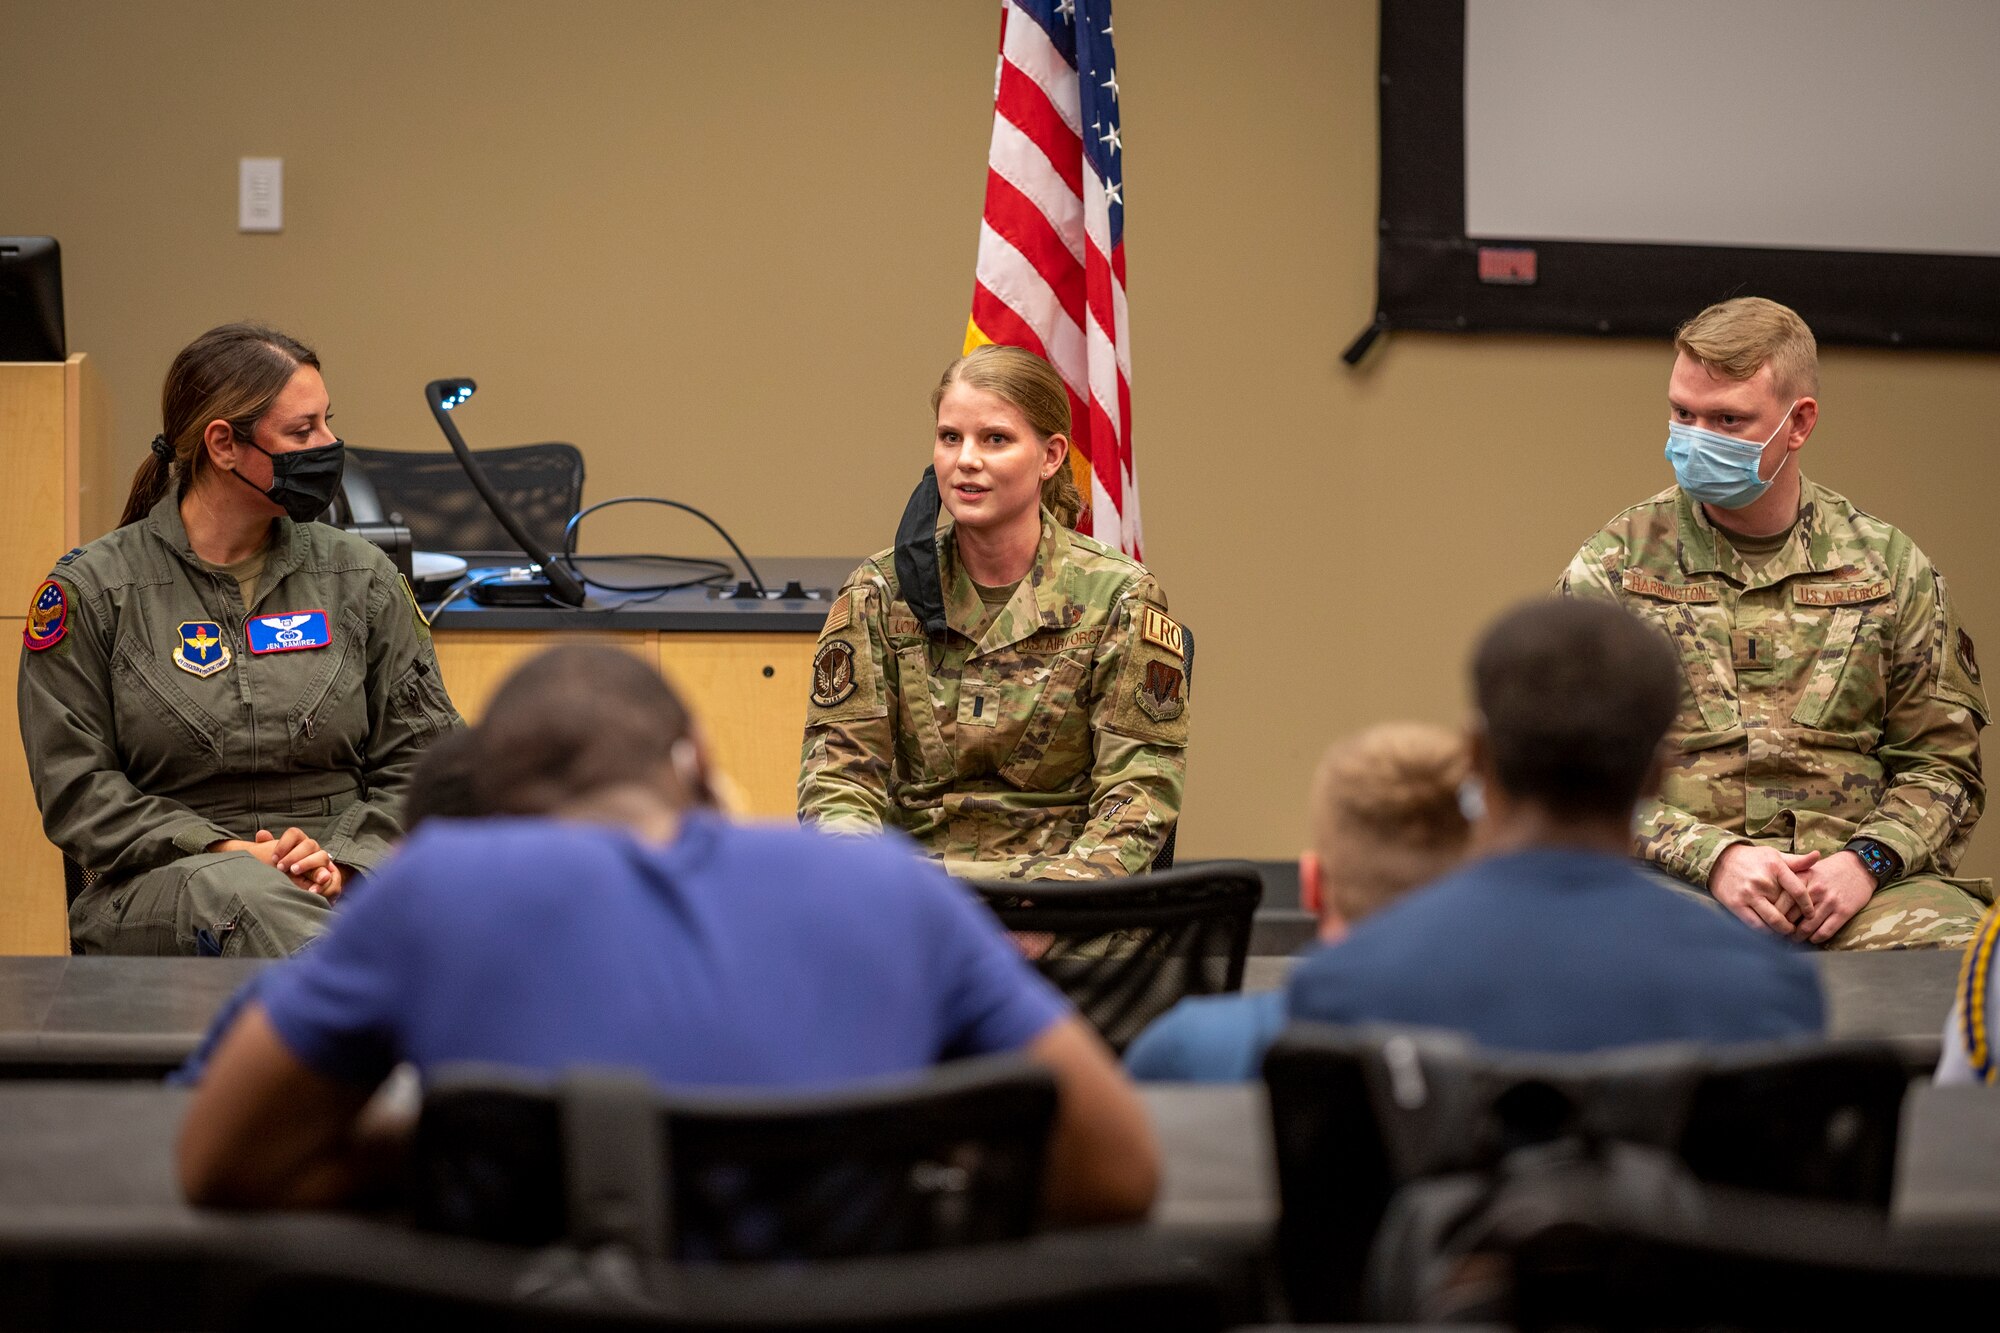 Officers assigned to Seymour Johnson Air Force Base speak with ROTC cadets at North Carolina Agricultural and Technical State University in Greensboro, North Carolina, Oct. 28, 2021.